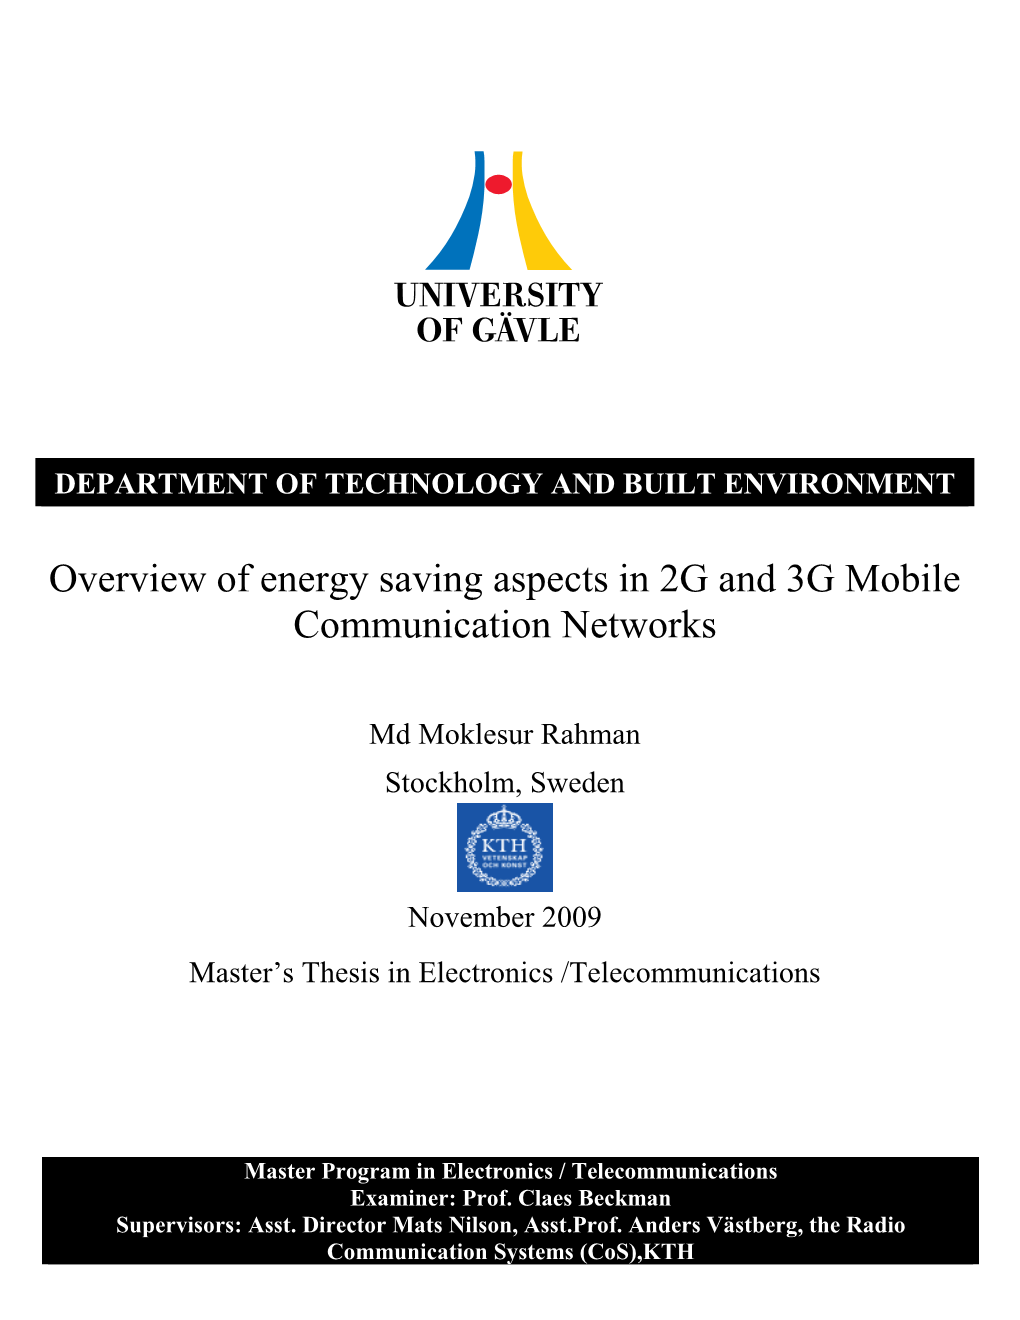 Overview of Energy Saving Aspects in 2G and 3G Mobile Communication Networks